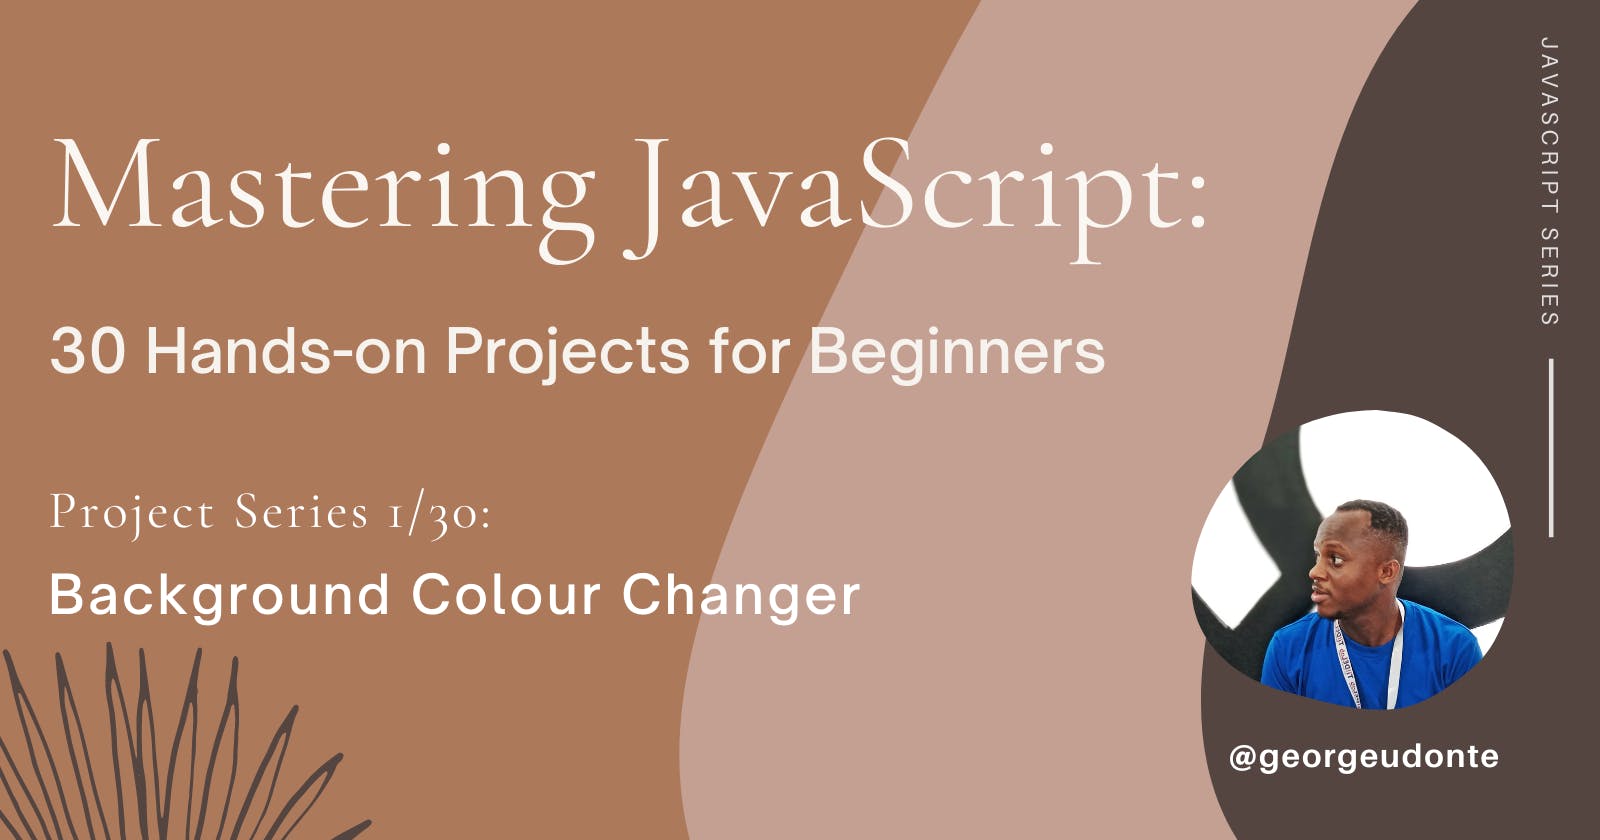 Mastering JavaScript: 30 Hands-on Projects for Beginners (Project Series 1/30)